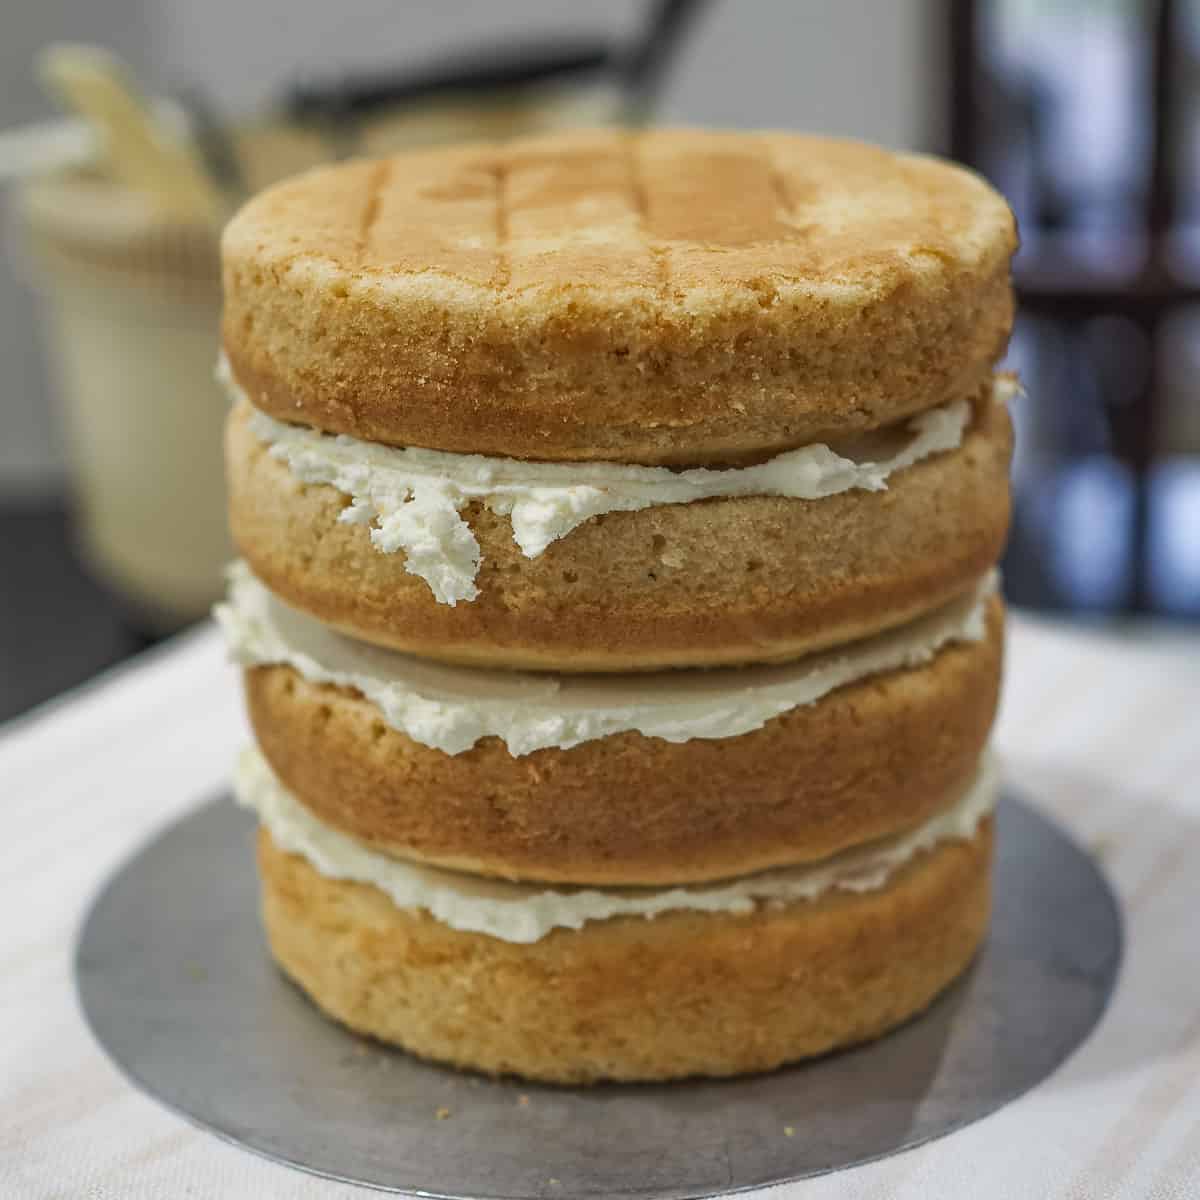 4 layers of cake stacked with buttercream filling